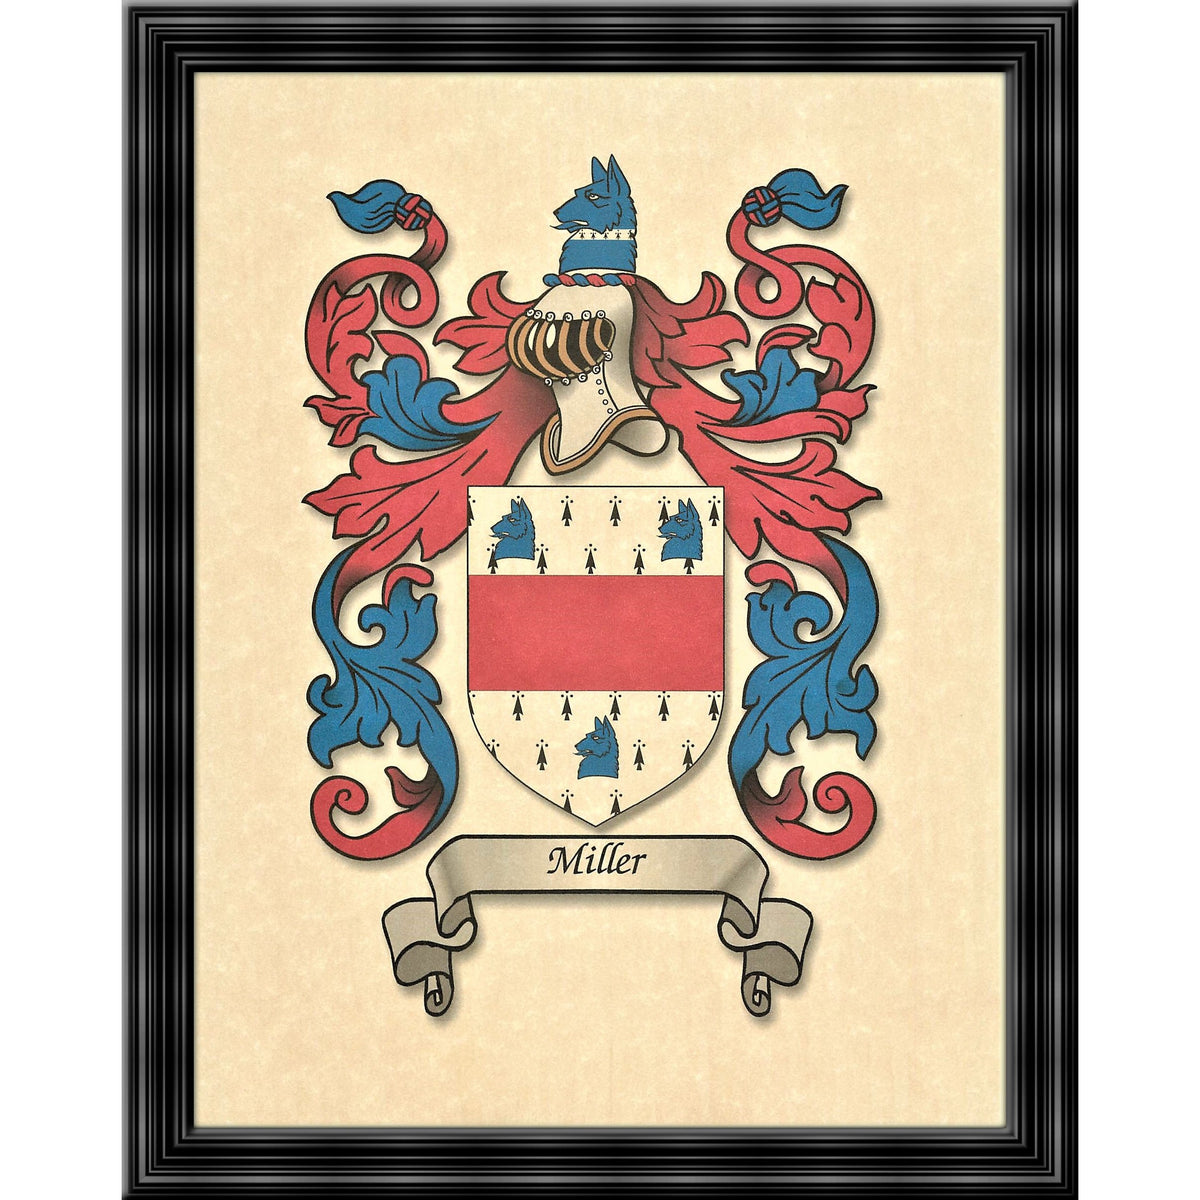 Authentic Family Coat of Arms full color - Size: 11" x 8.5" CM 21.5 x